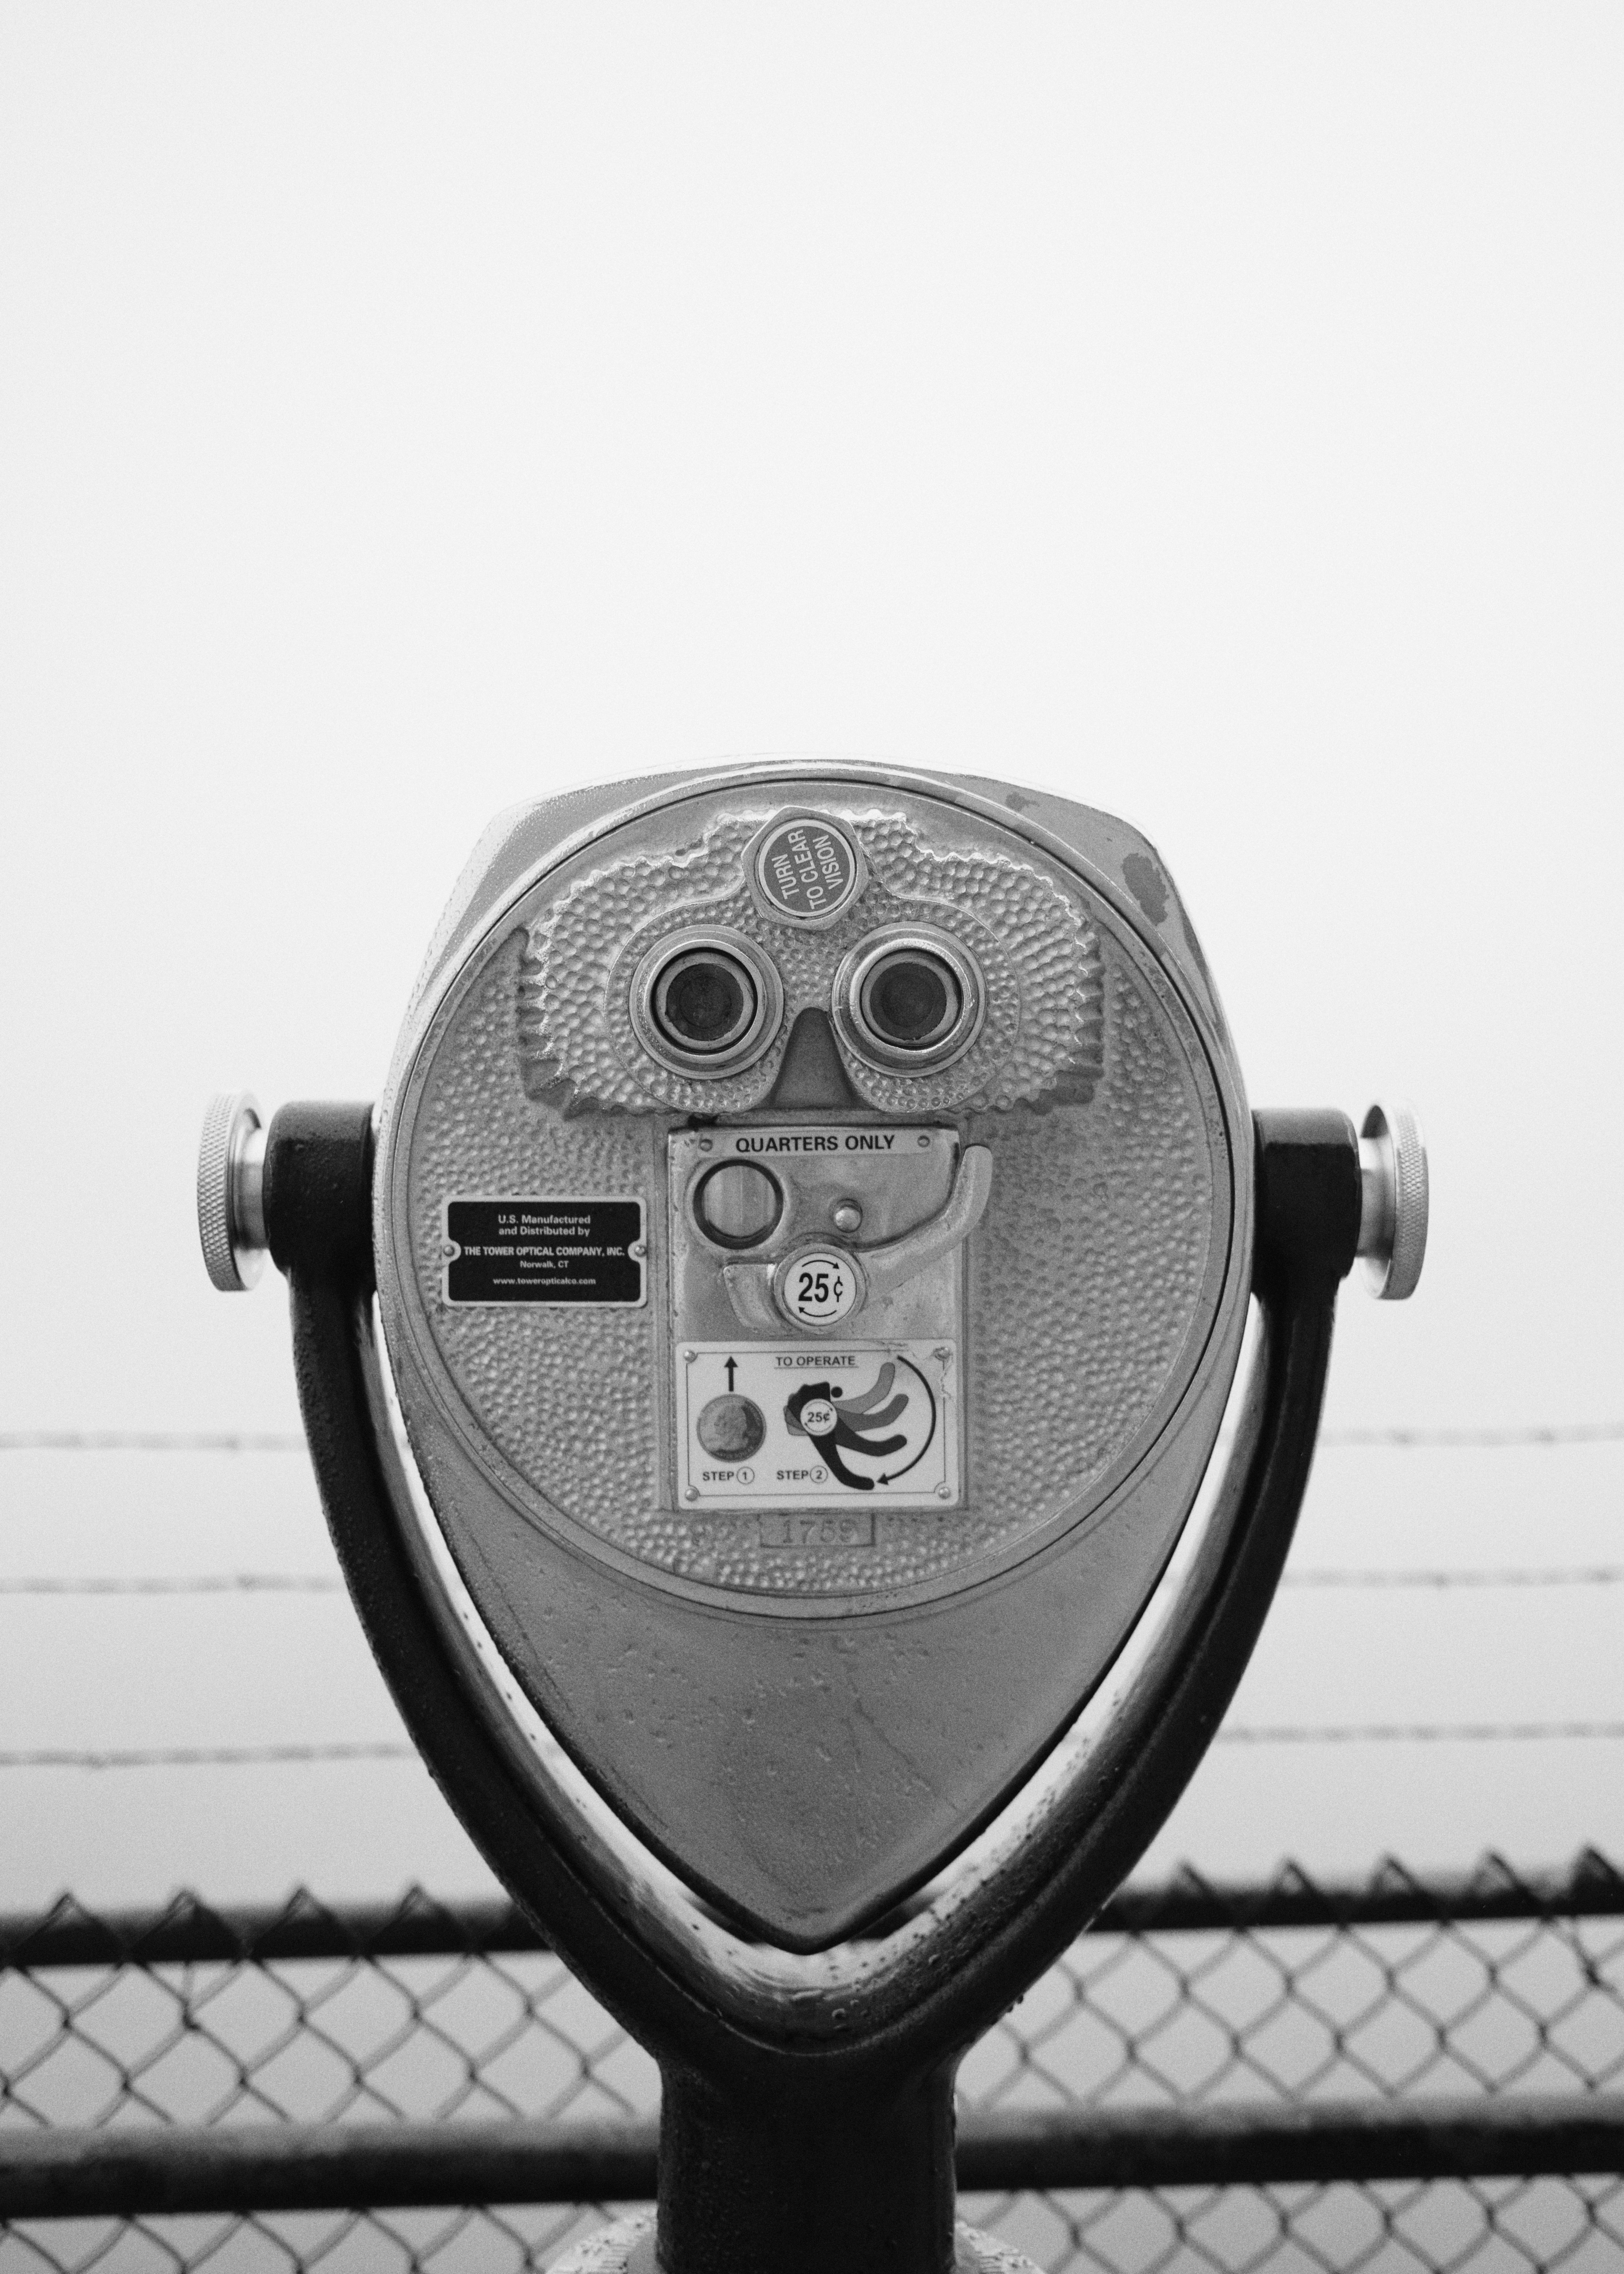 gray coin operated binoculars on white background